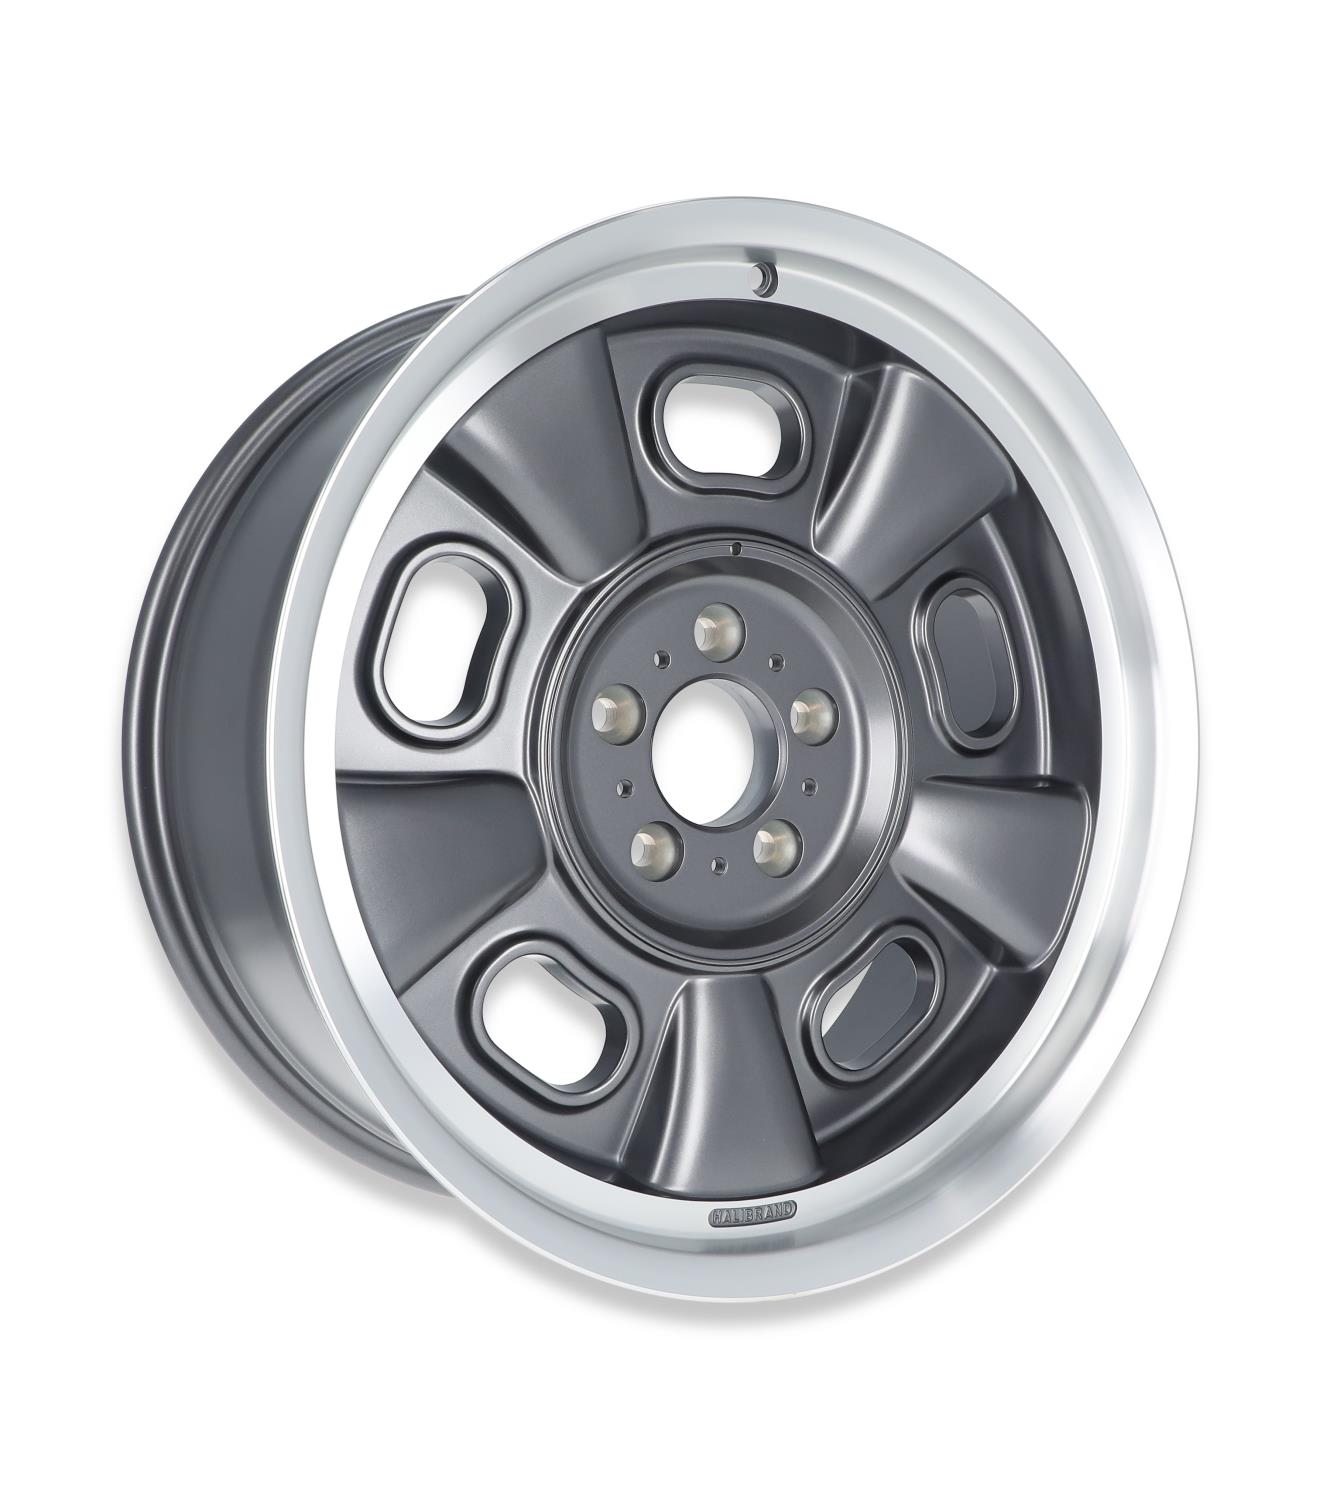 Indy Roadster Wheel, Size: 20x8.5", Bolt Pattern: 5x5", Backspace: 5.25" [Anthracite - Semi Gloss Clearcoat]